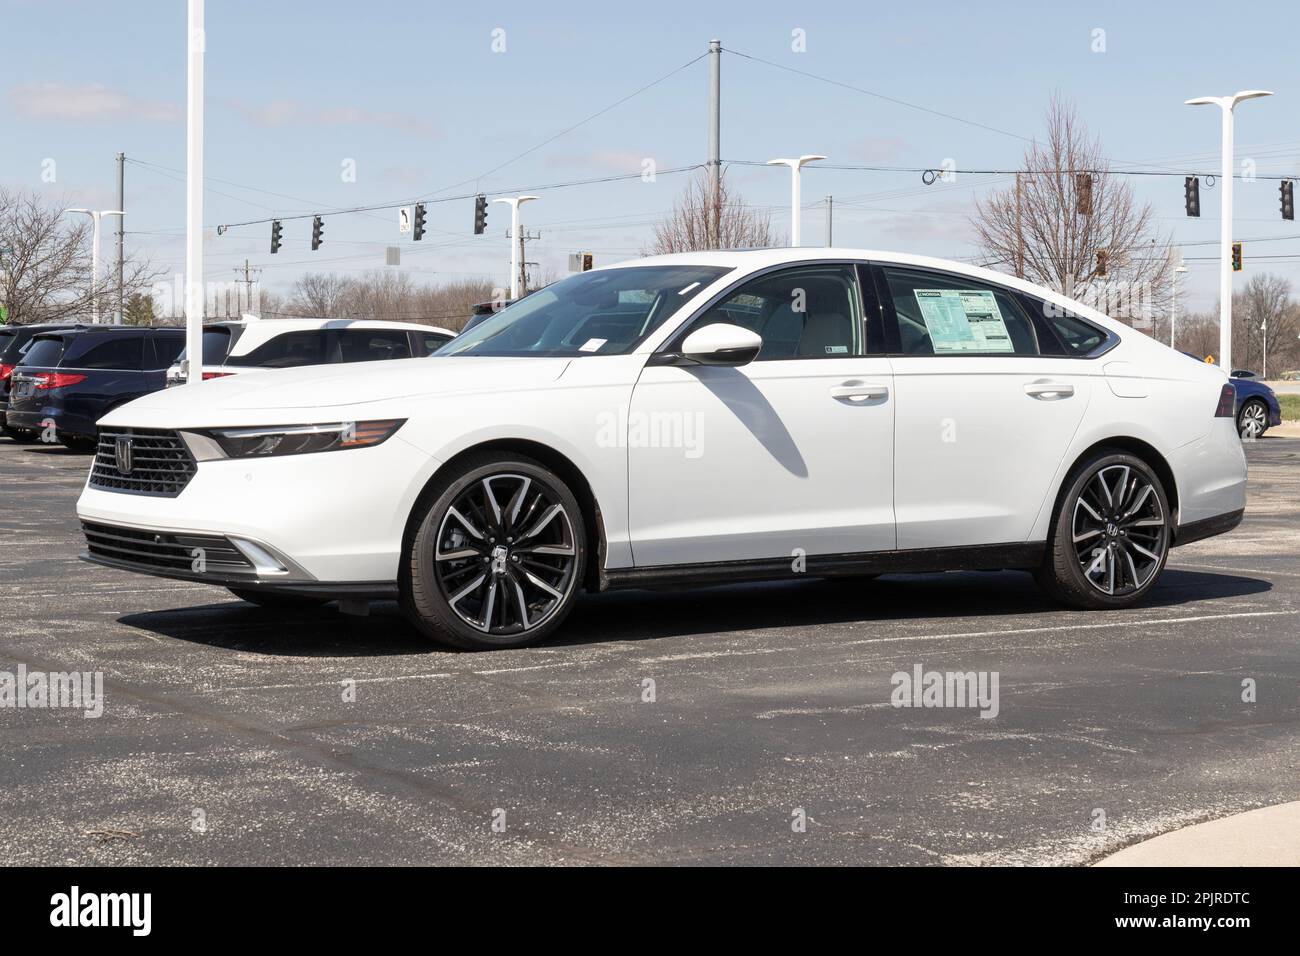 Avon - Circa April 2023: Honda Accord Hybrid display at a dealership. The Honda Accord is one of the top 25 cars sold in the US every year. Stock Photo